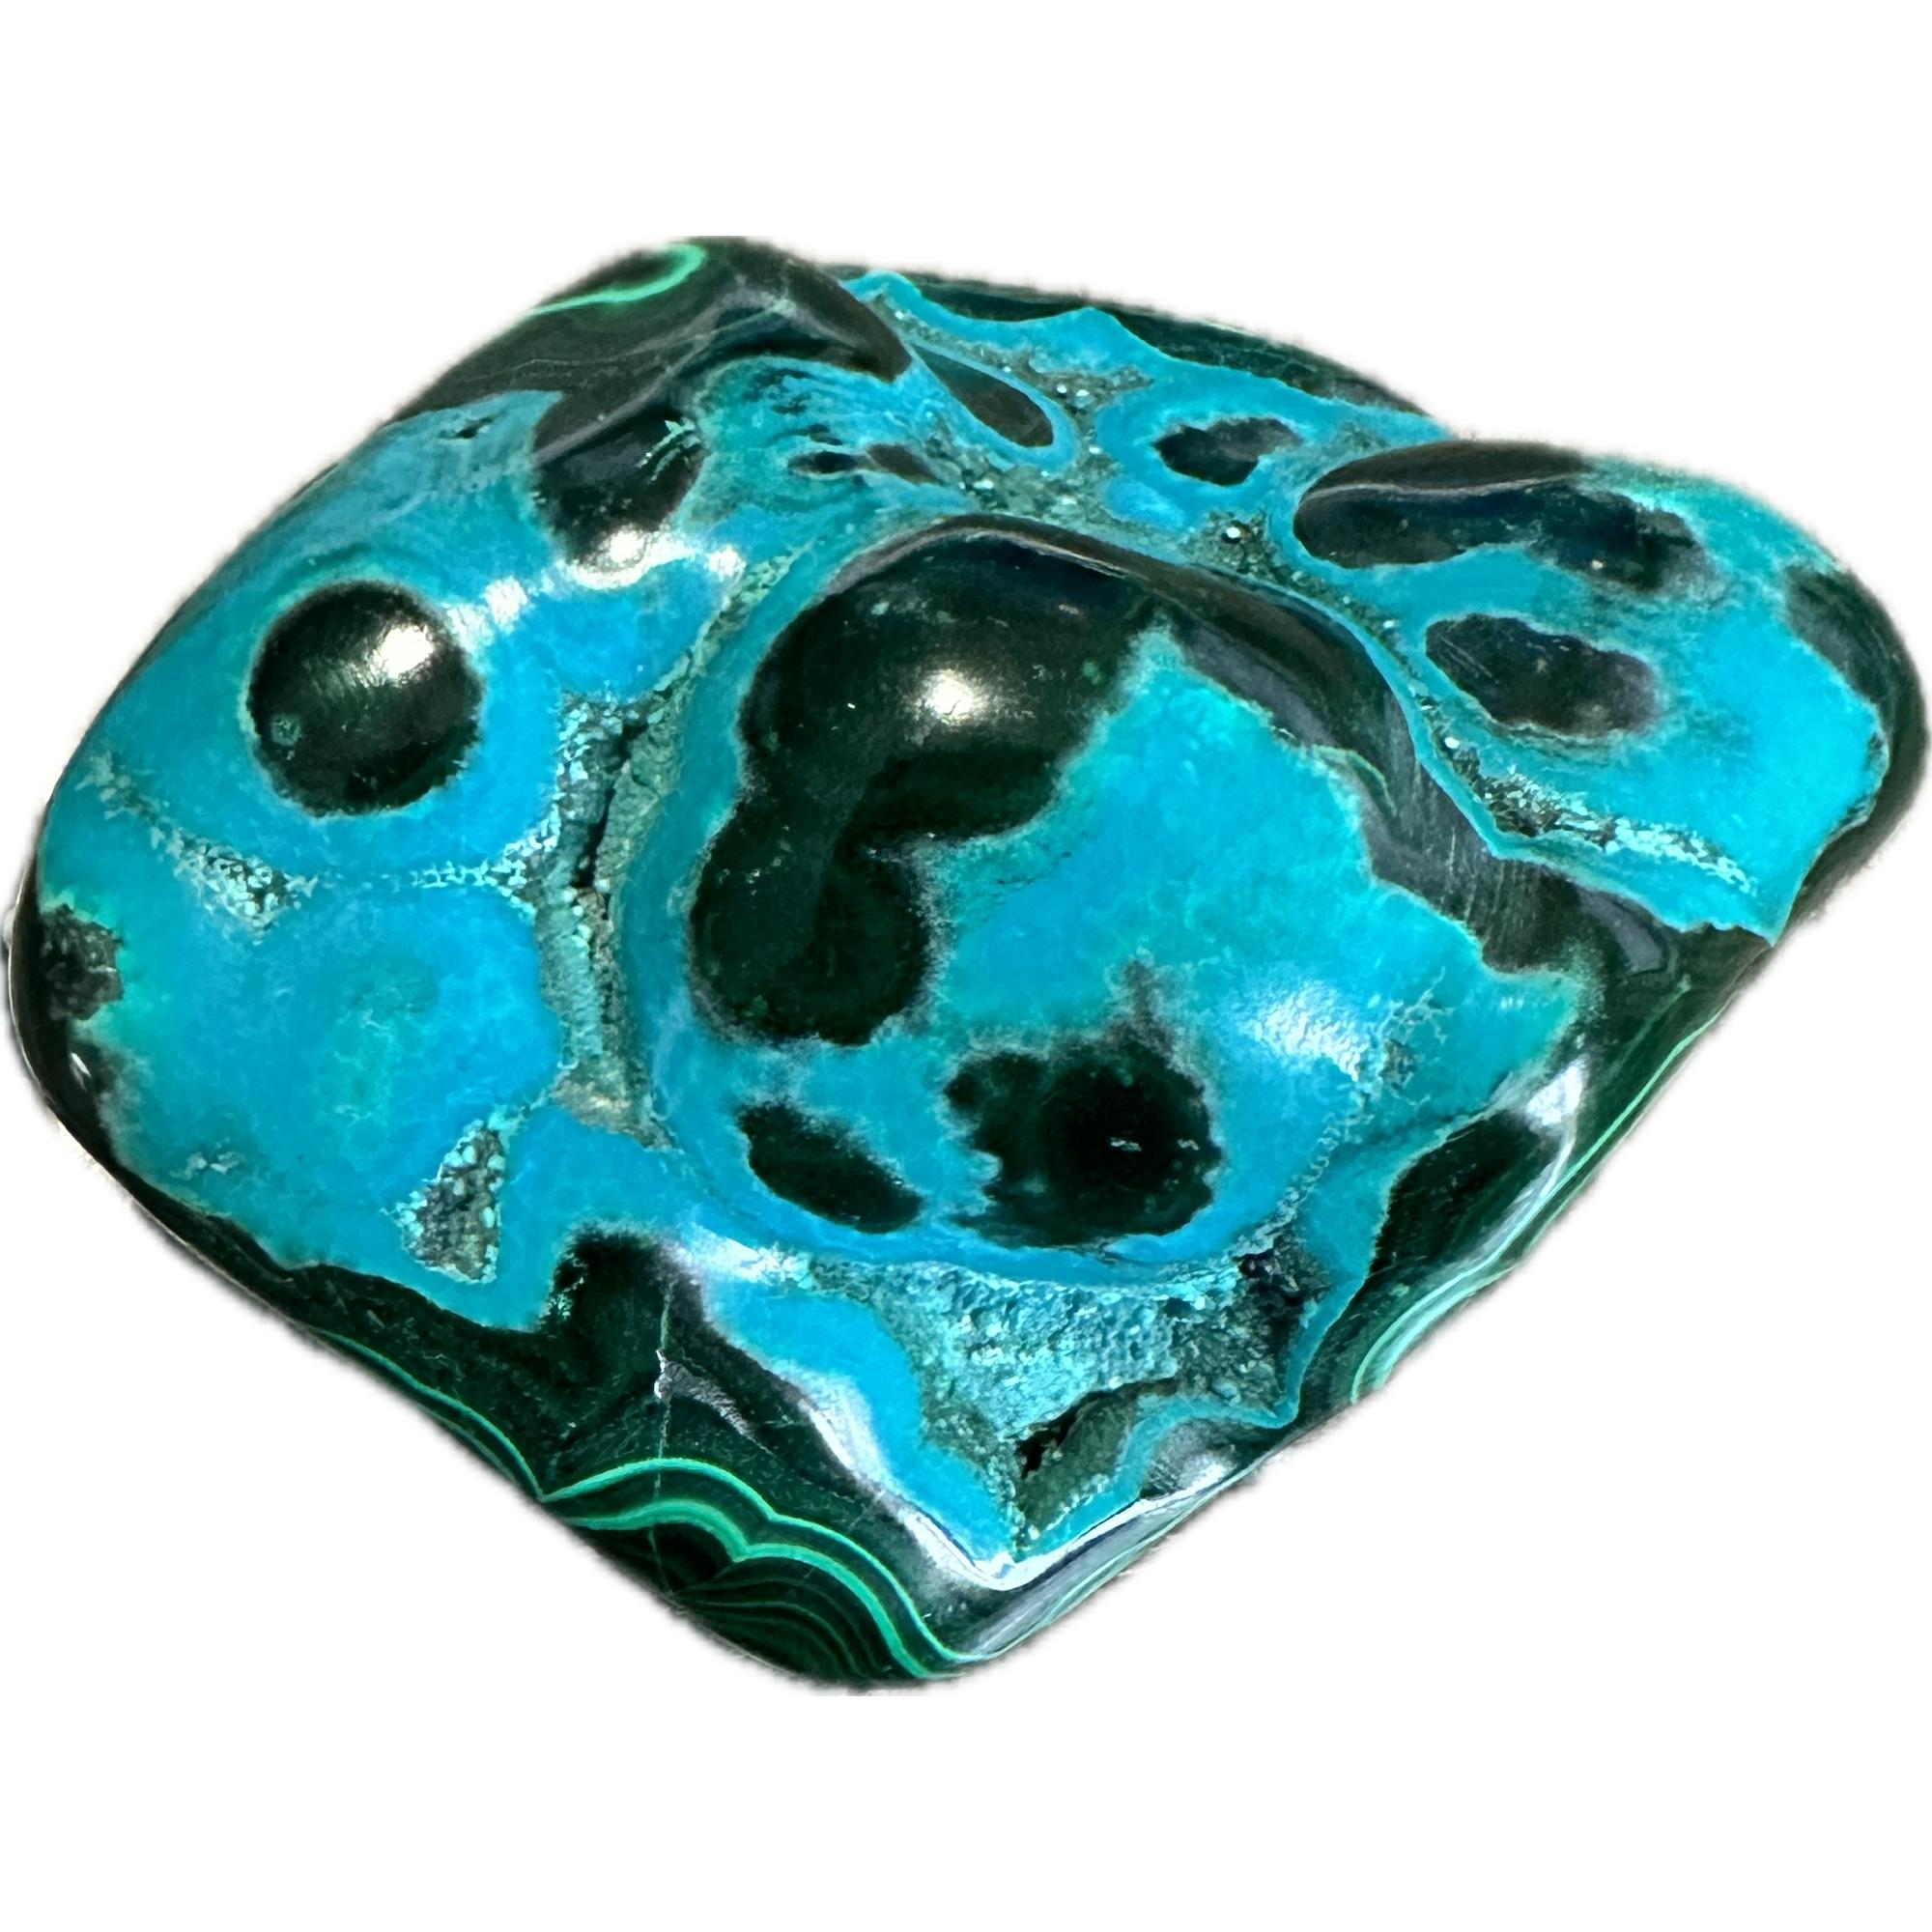 Chrysocolla with Malachite, blue and green melded beautifully, 3″x 2 1/2″ Prehistoric Online